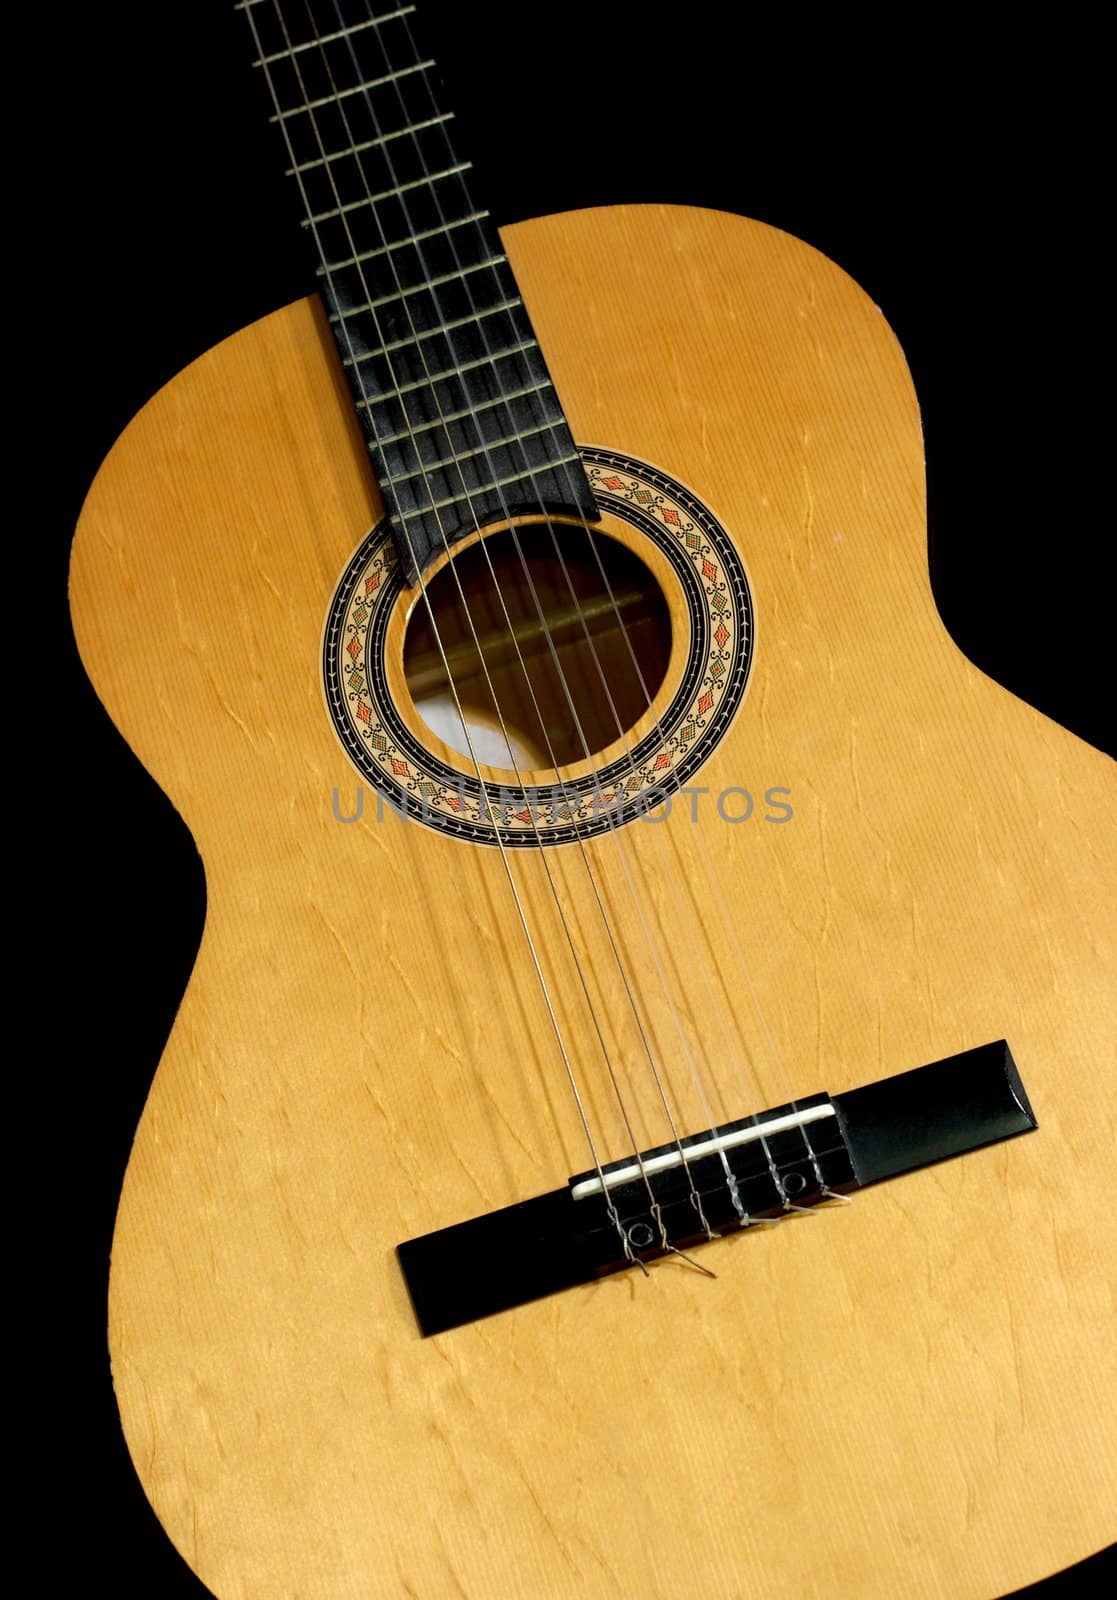 Neck and head of an acoustic guitar, isolated black background with copy-space